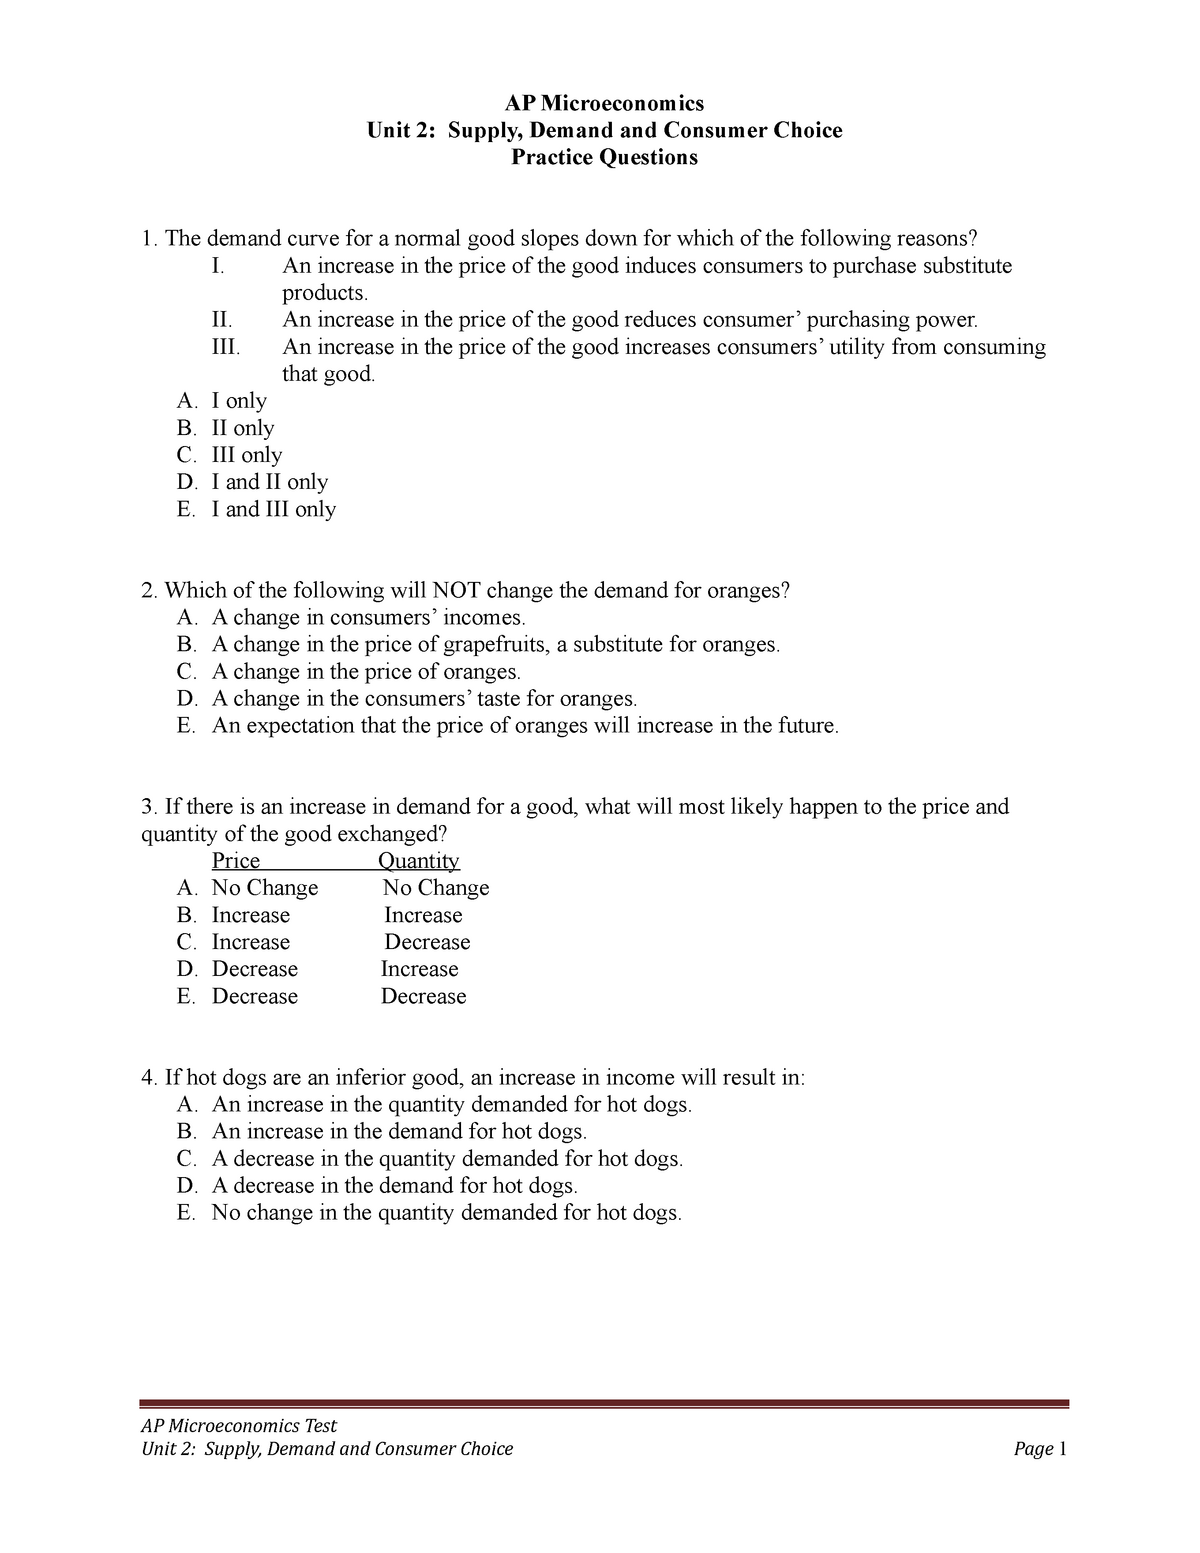 microeconomics essay questions and answers